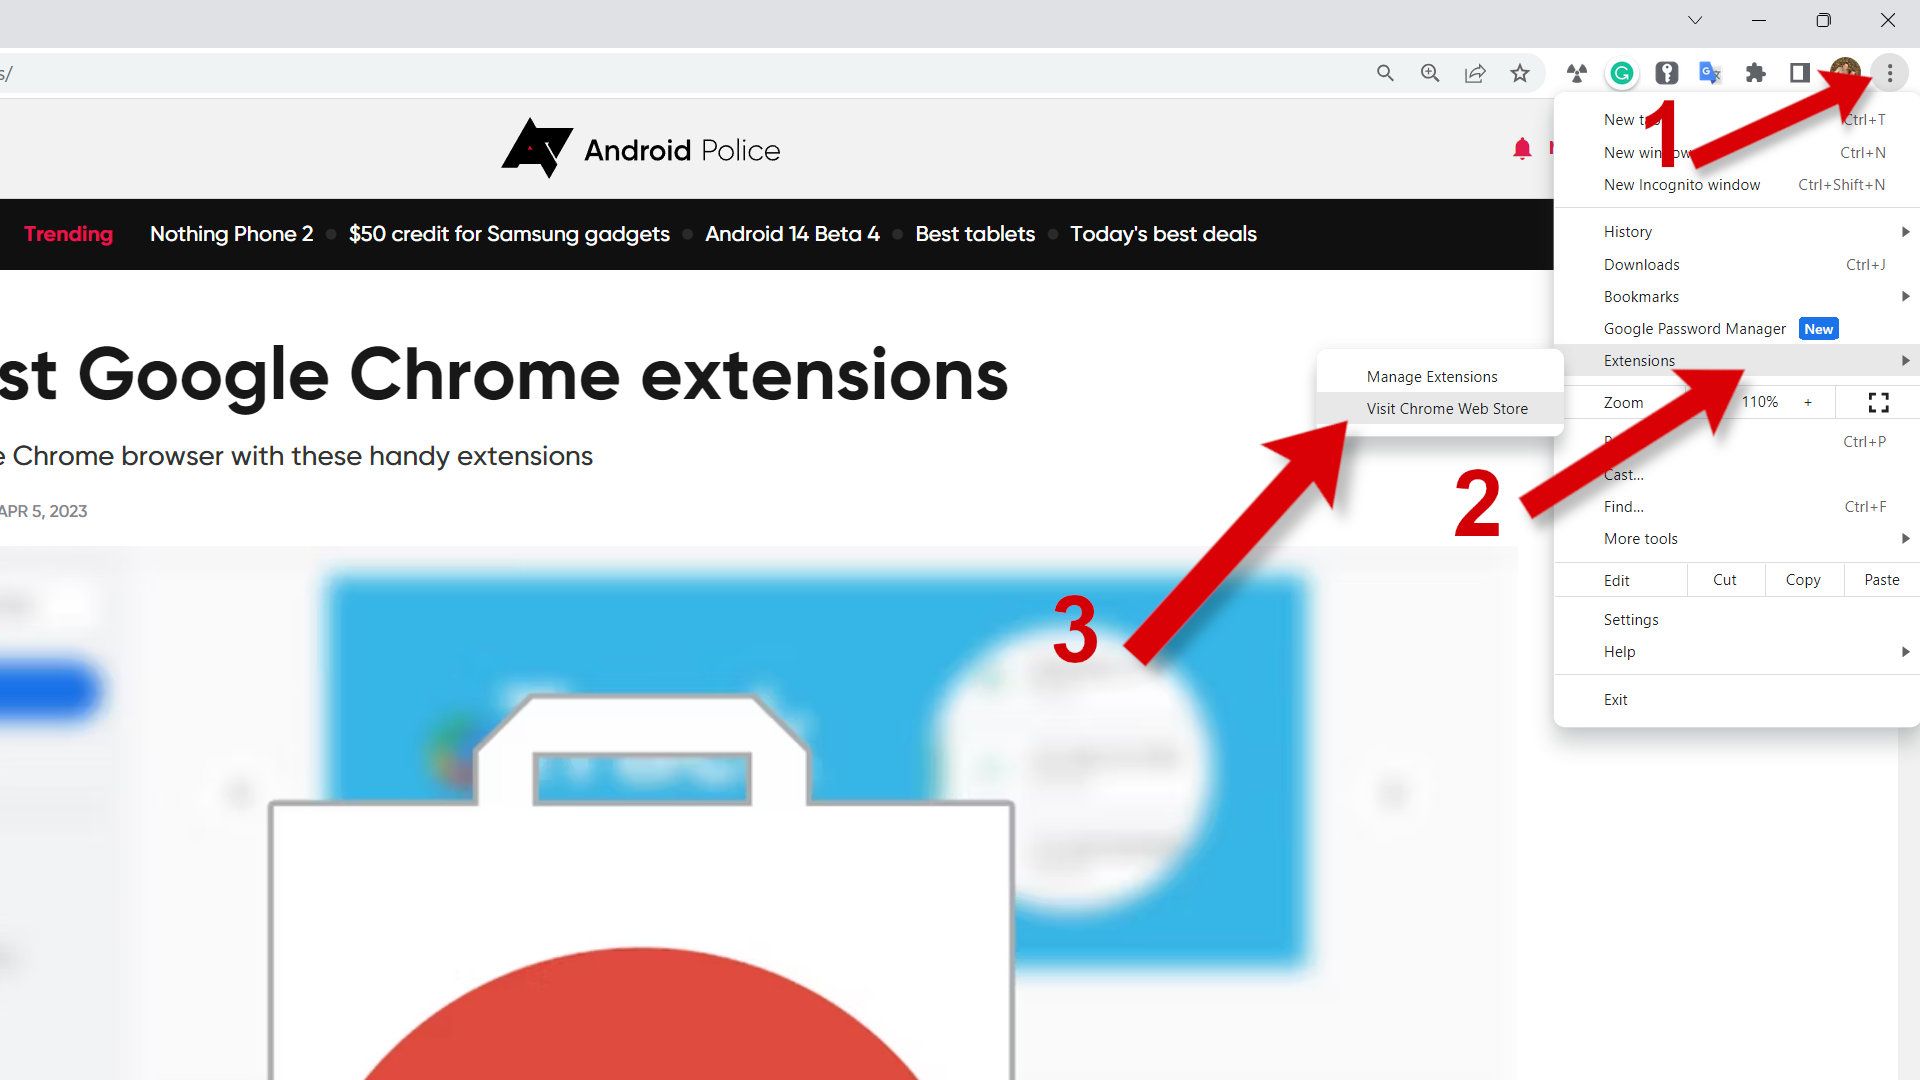 How to open the Chrome Web Store and install extensions